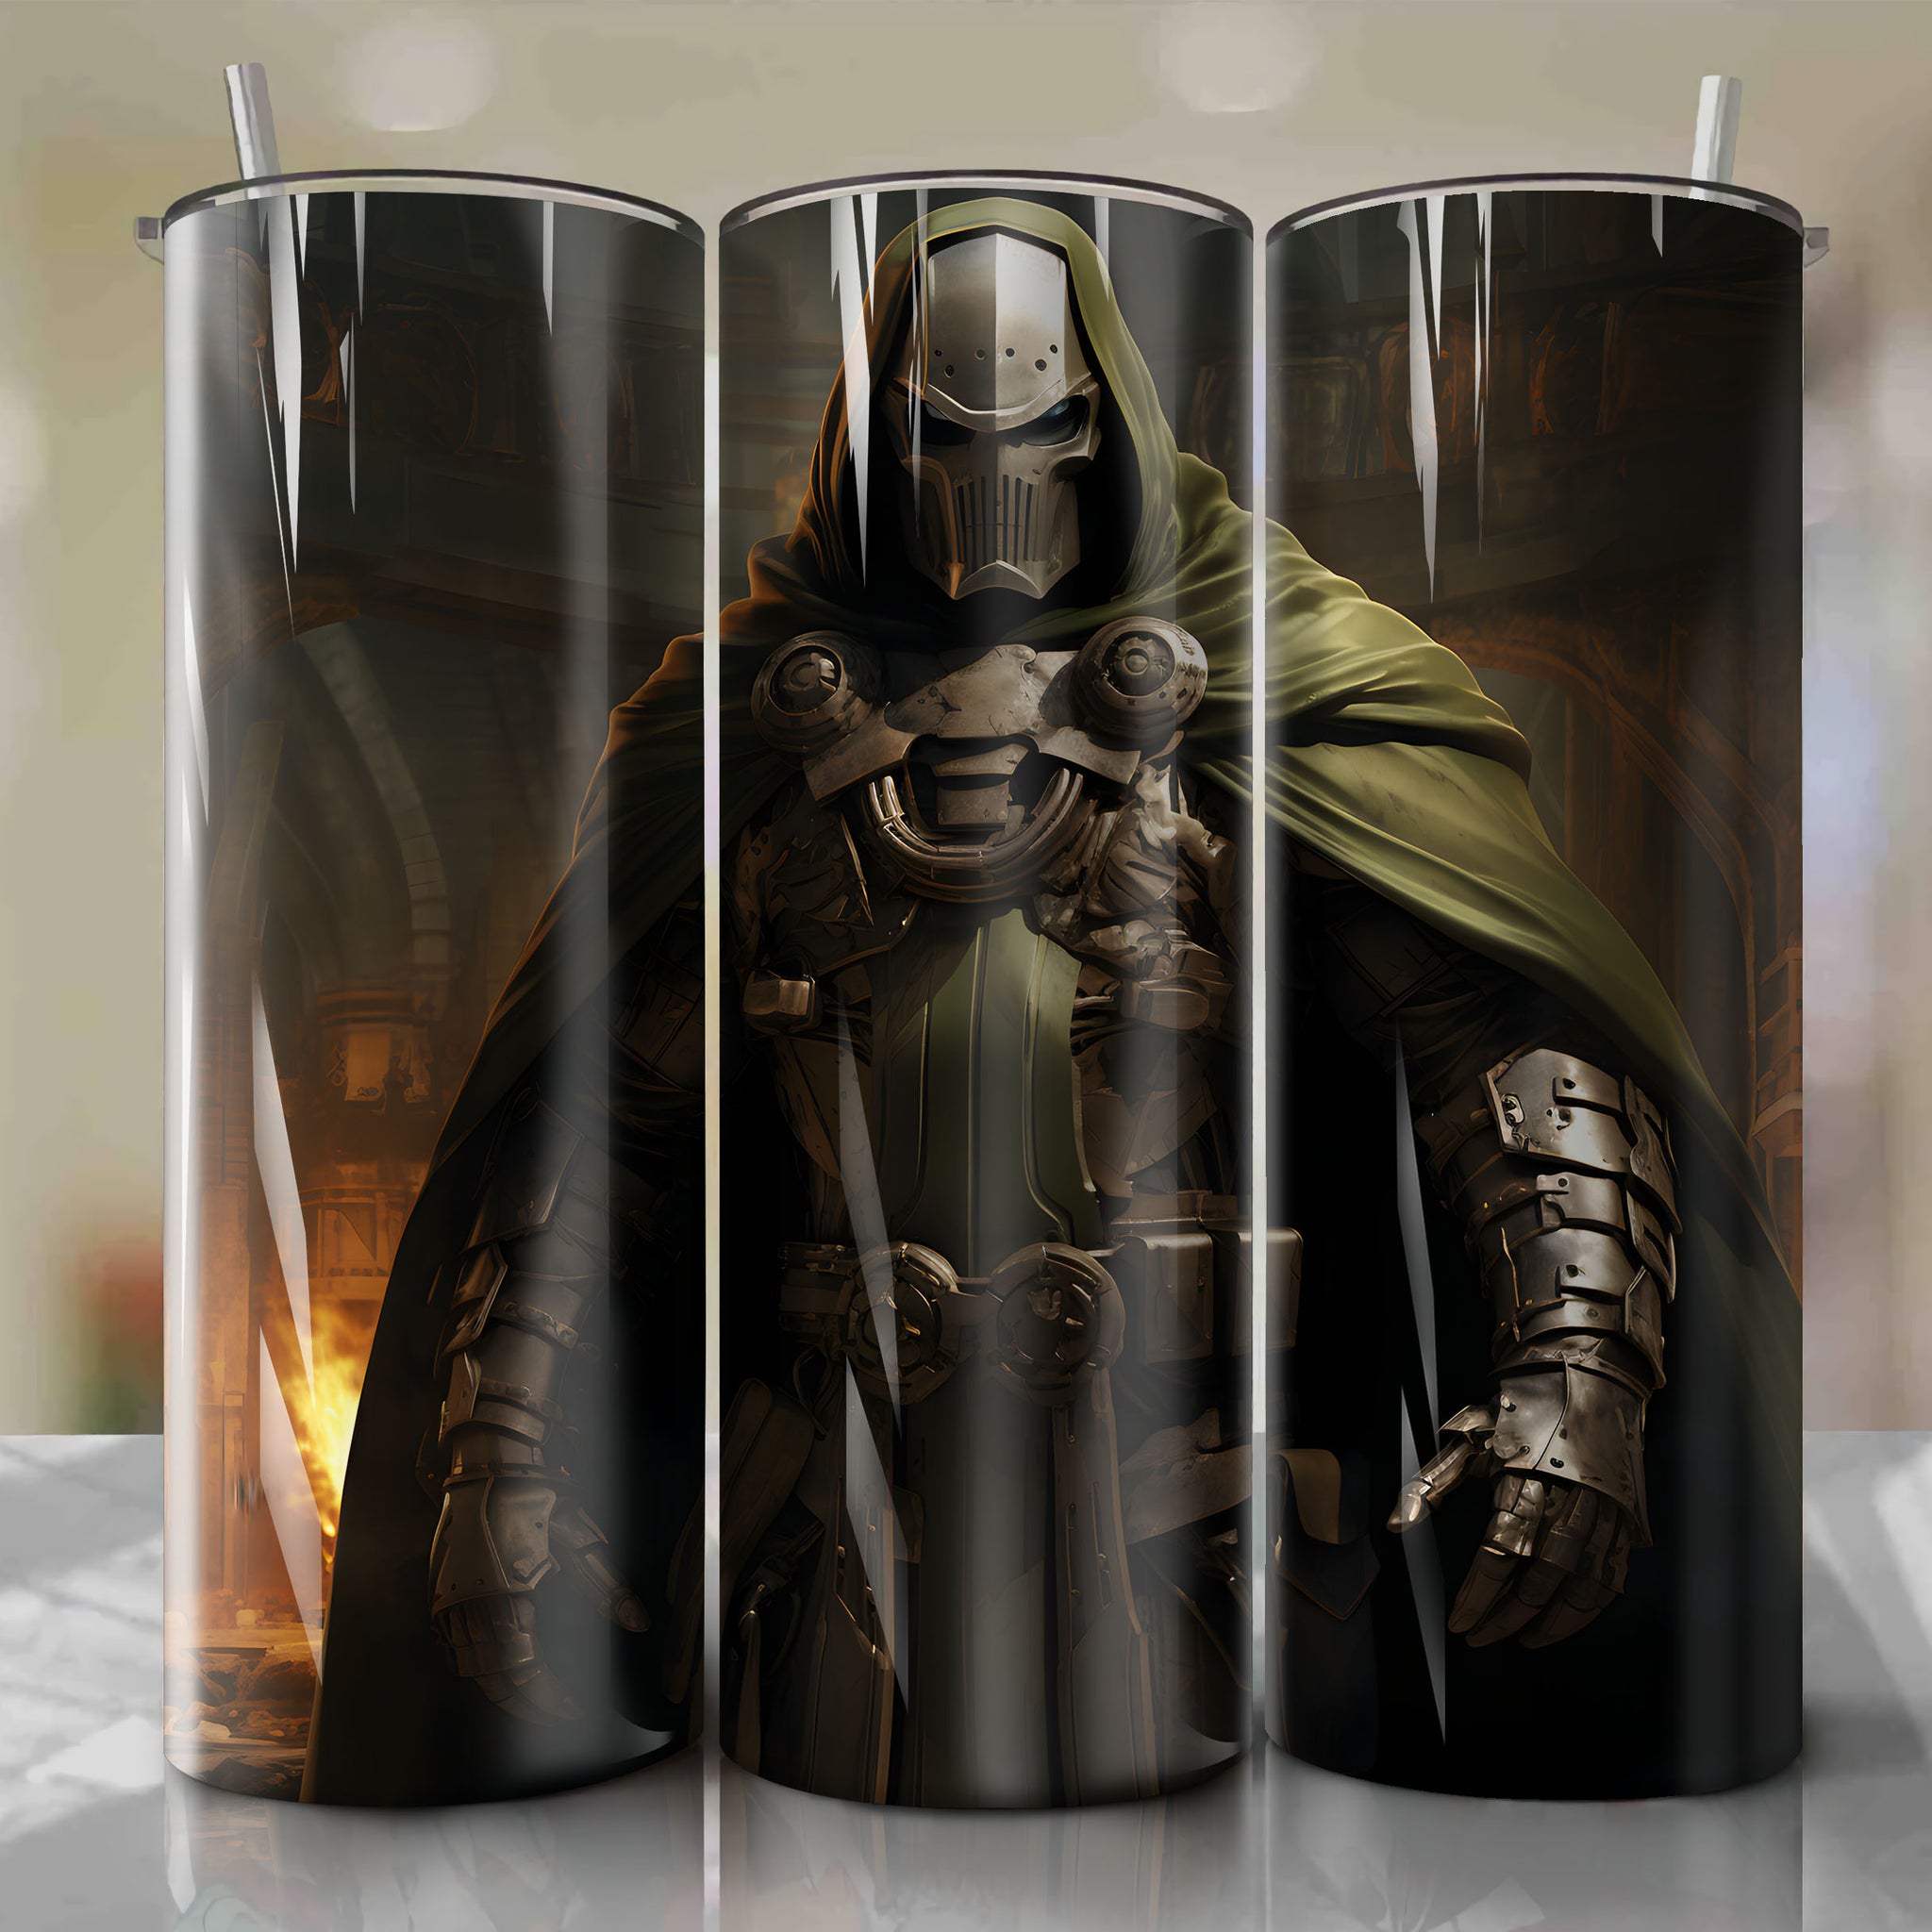 20 Oz Tumbler Wrap - Imposing Castle Doom - Power and Ambition Embodied in Stunning 3D Sculpture
